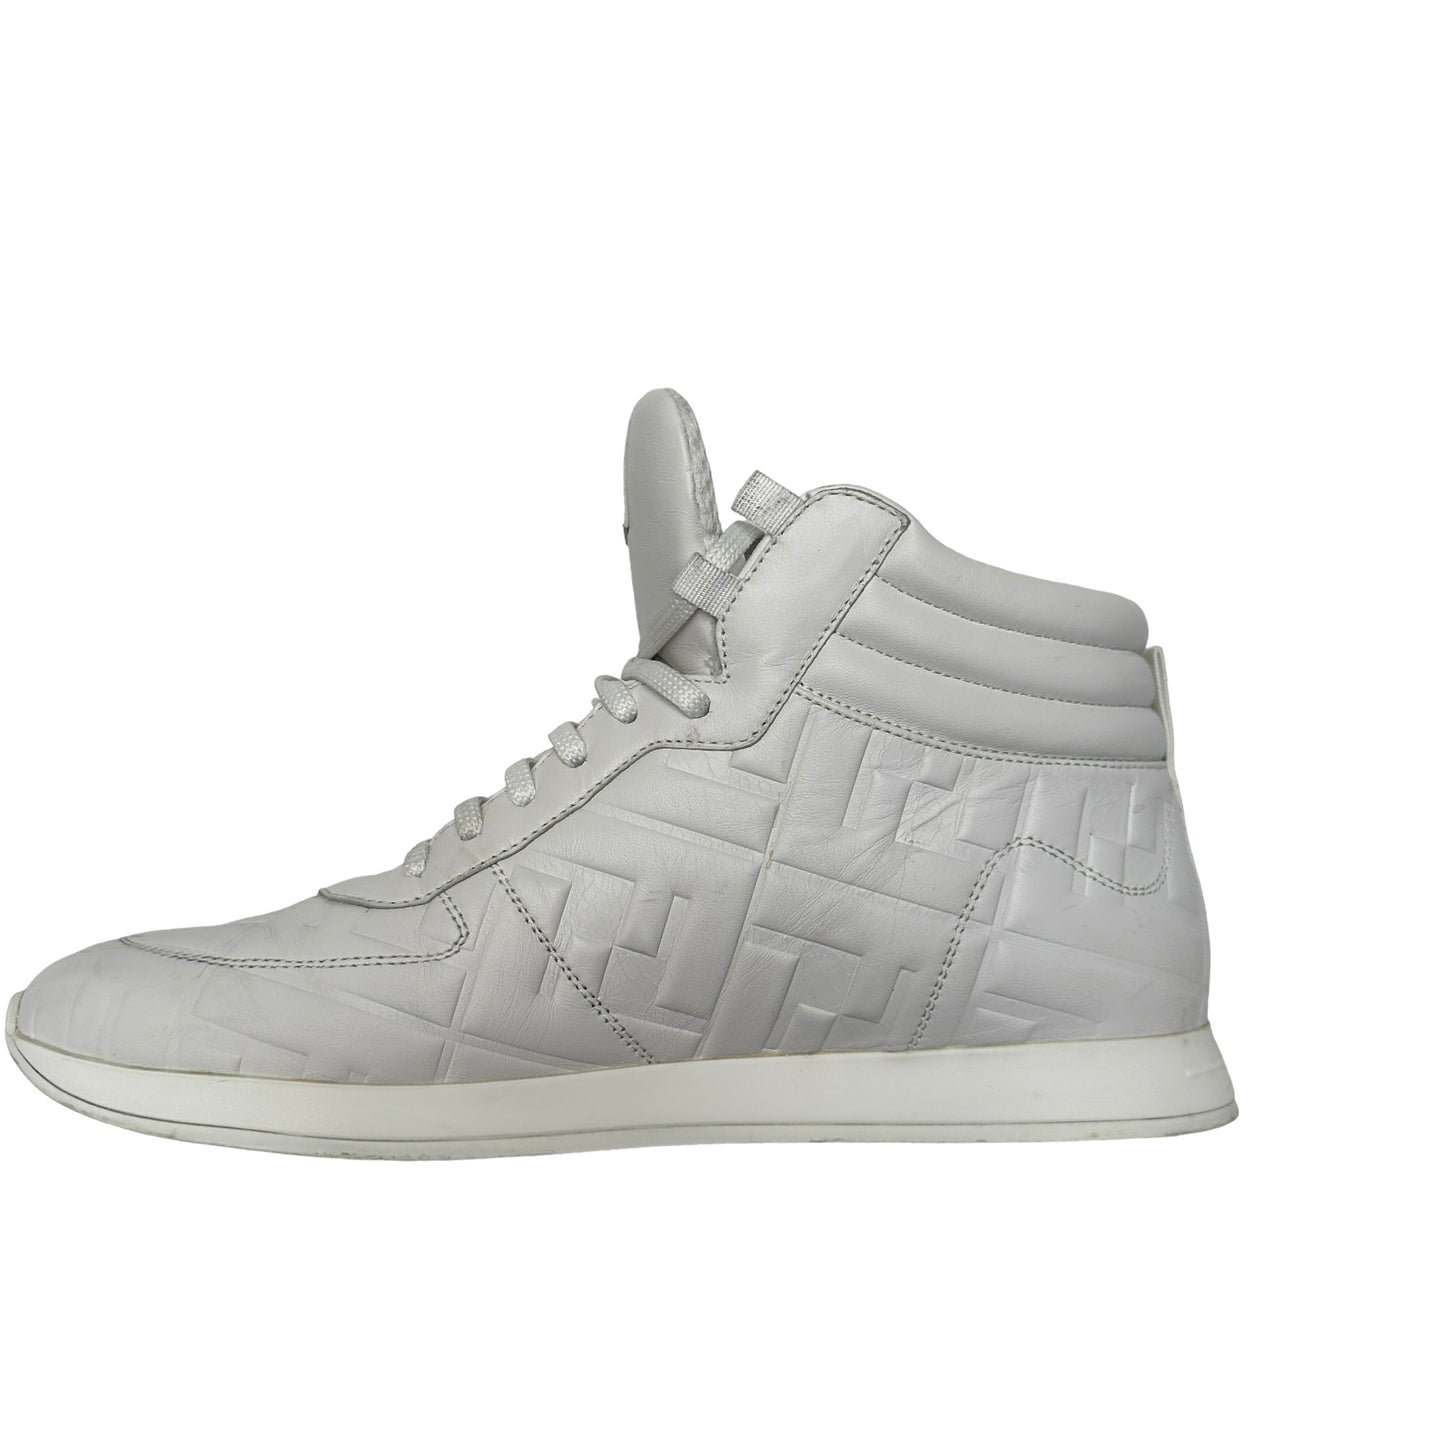 White Leather High Top Sneakers - 10